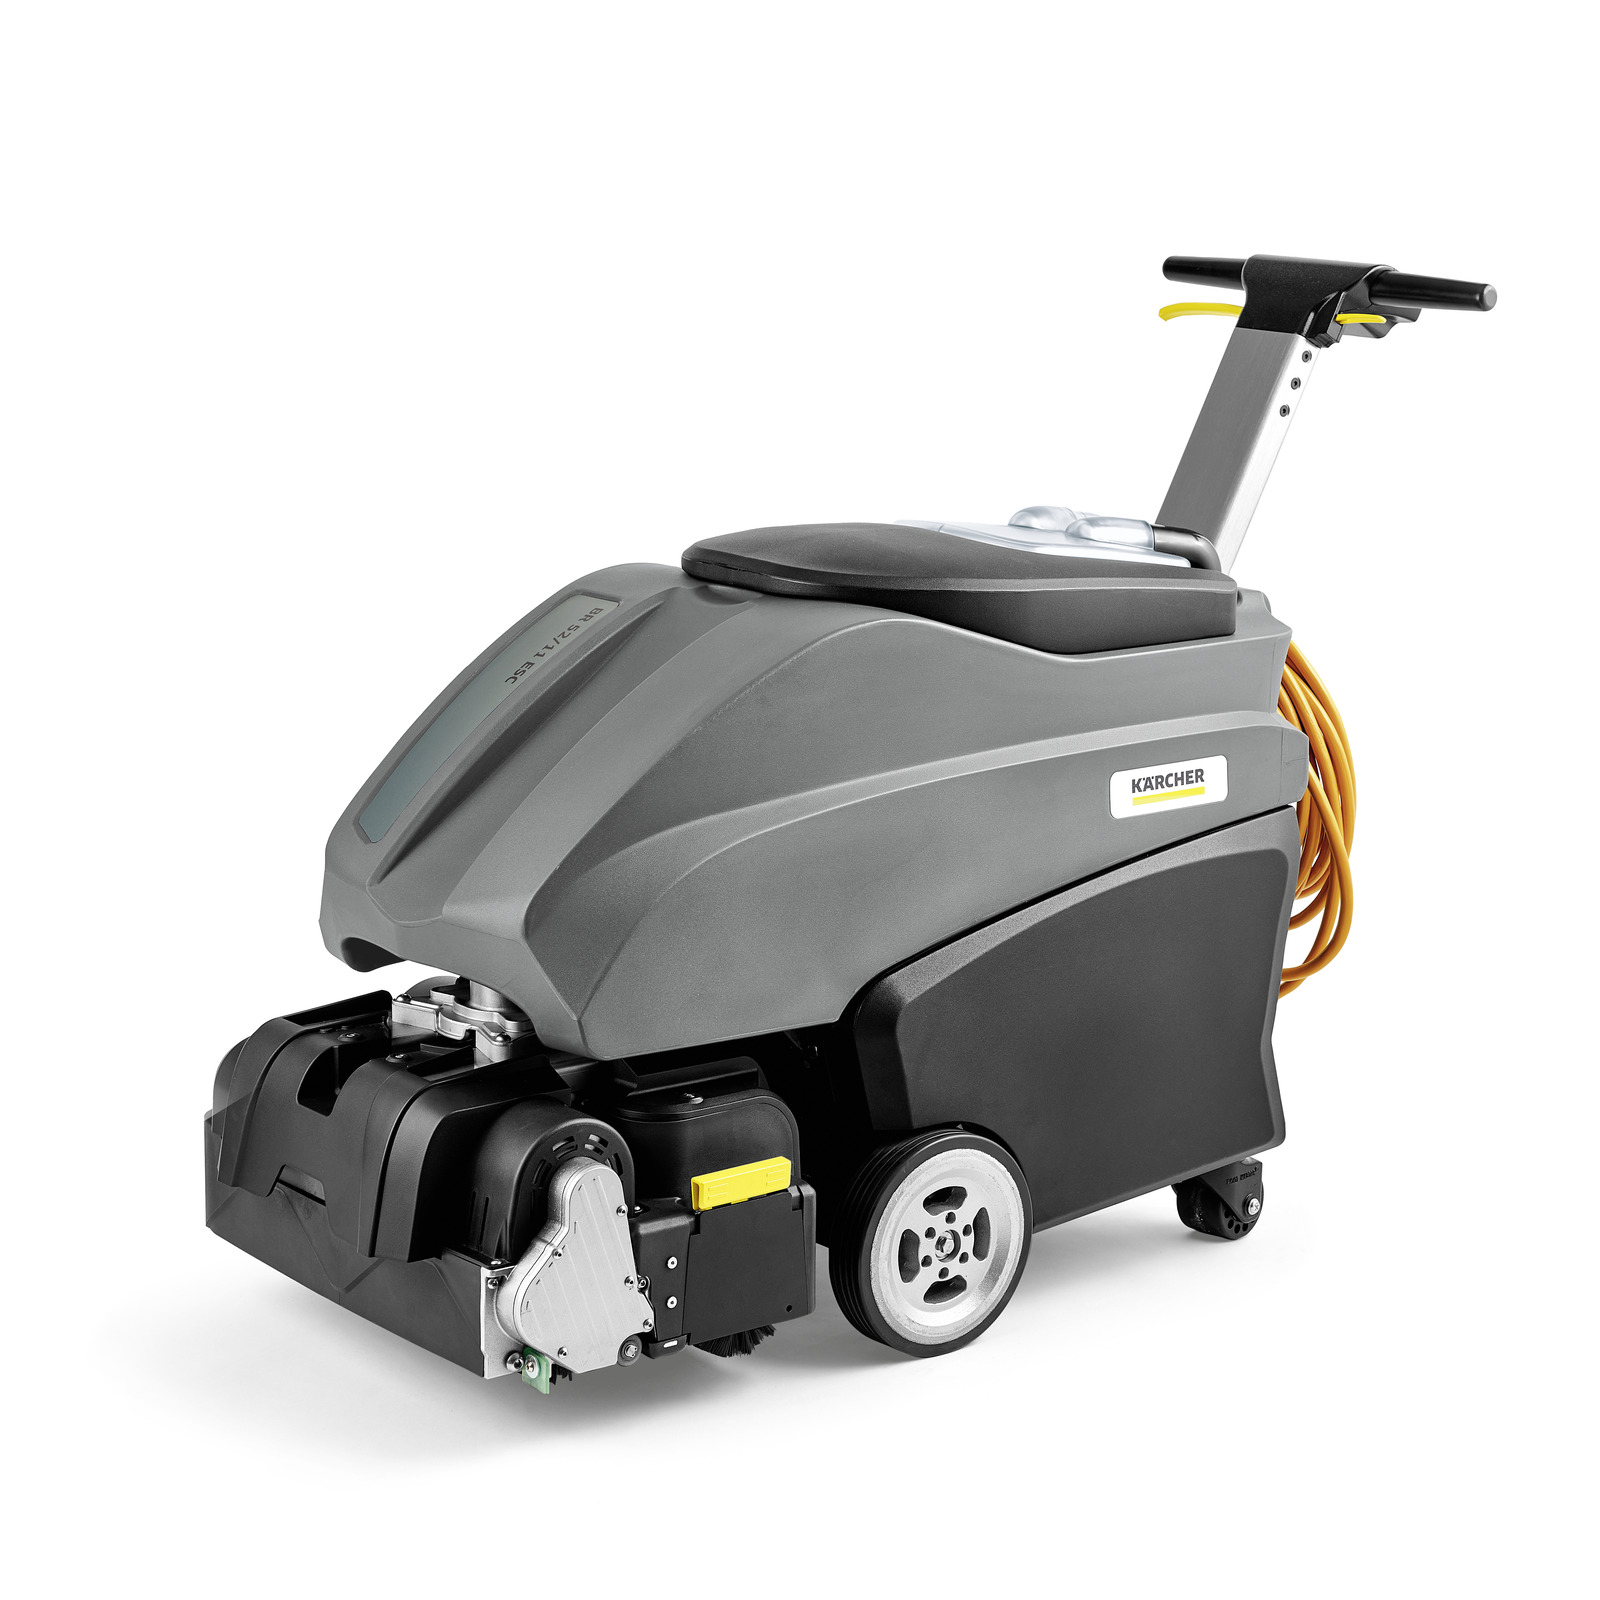 Specialty Cleaning Equipment